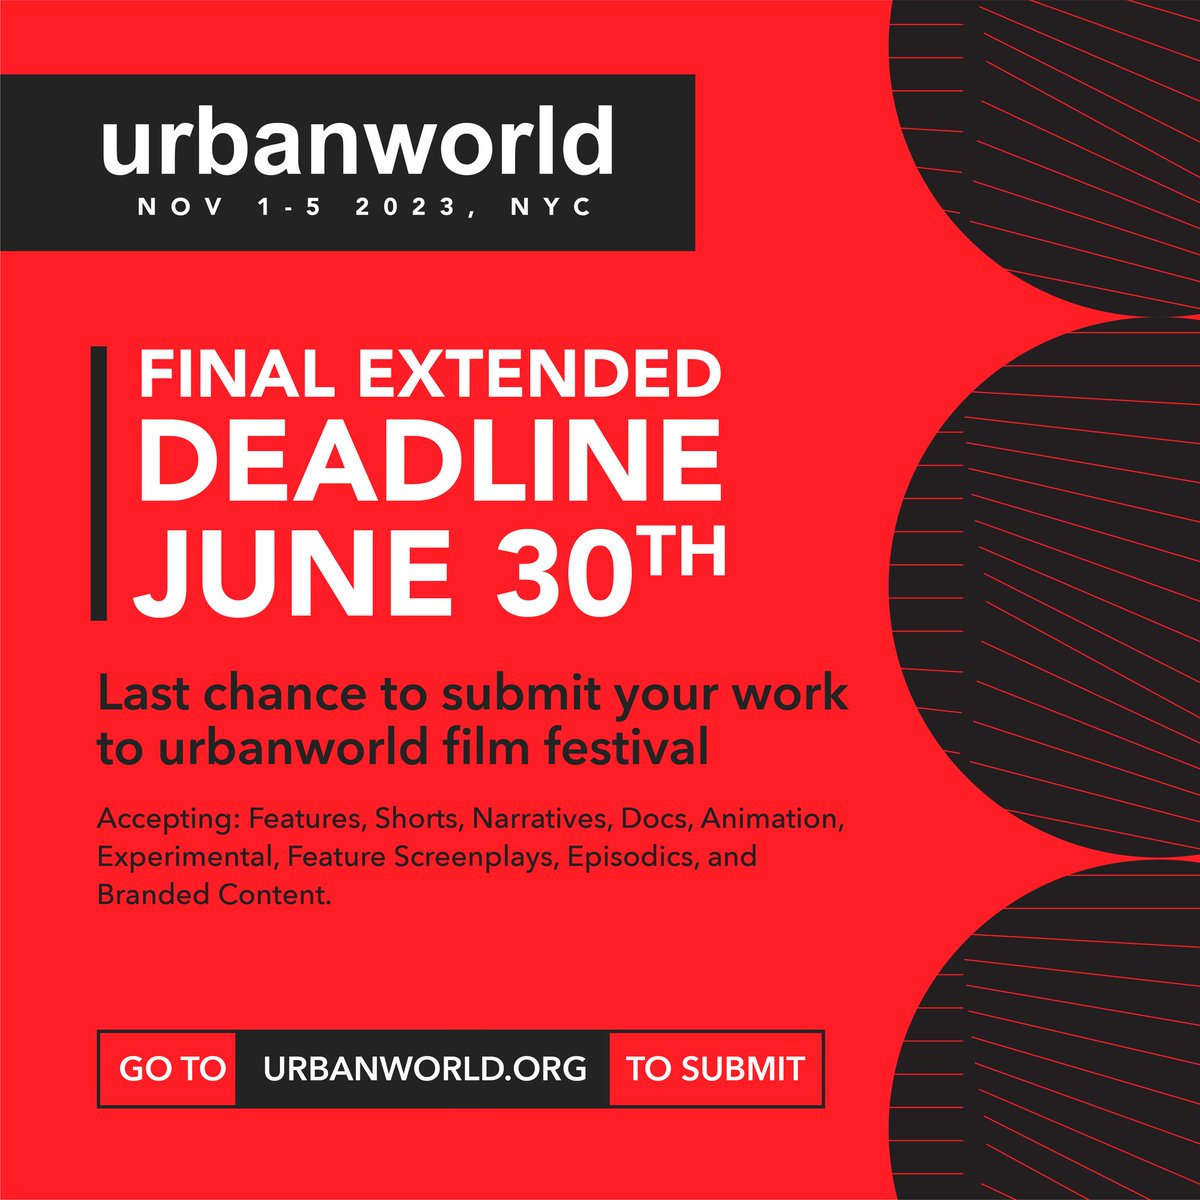 Filmmakers: Today is the last day to submit your film or screenplay via @filmfreeway. Open call will close tonight after 11:59 pm, your local time. Good luck!